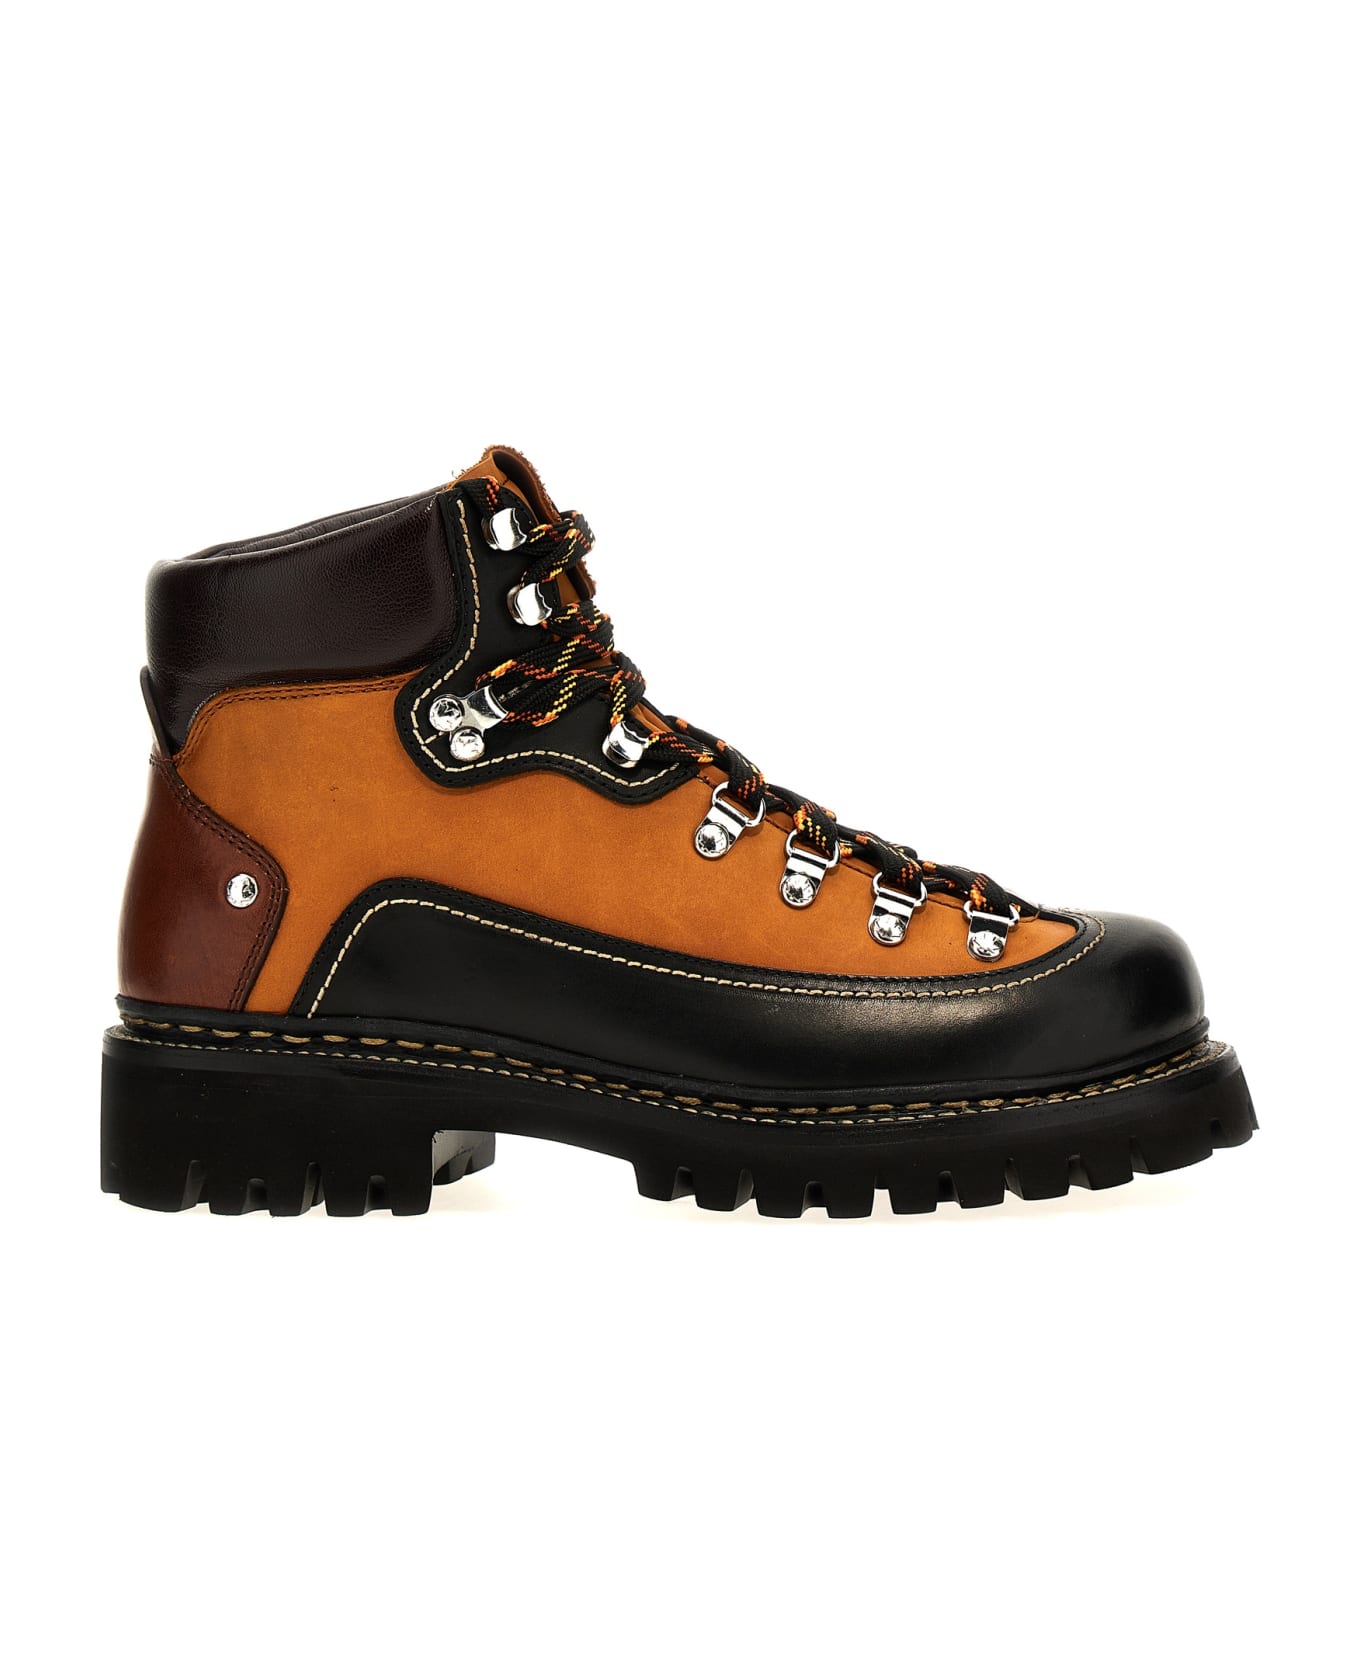 Dsquared2 'canadian' Hiking Boots - Brown